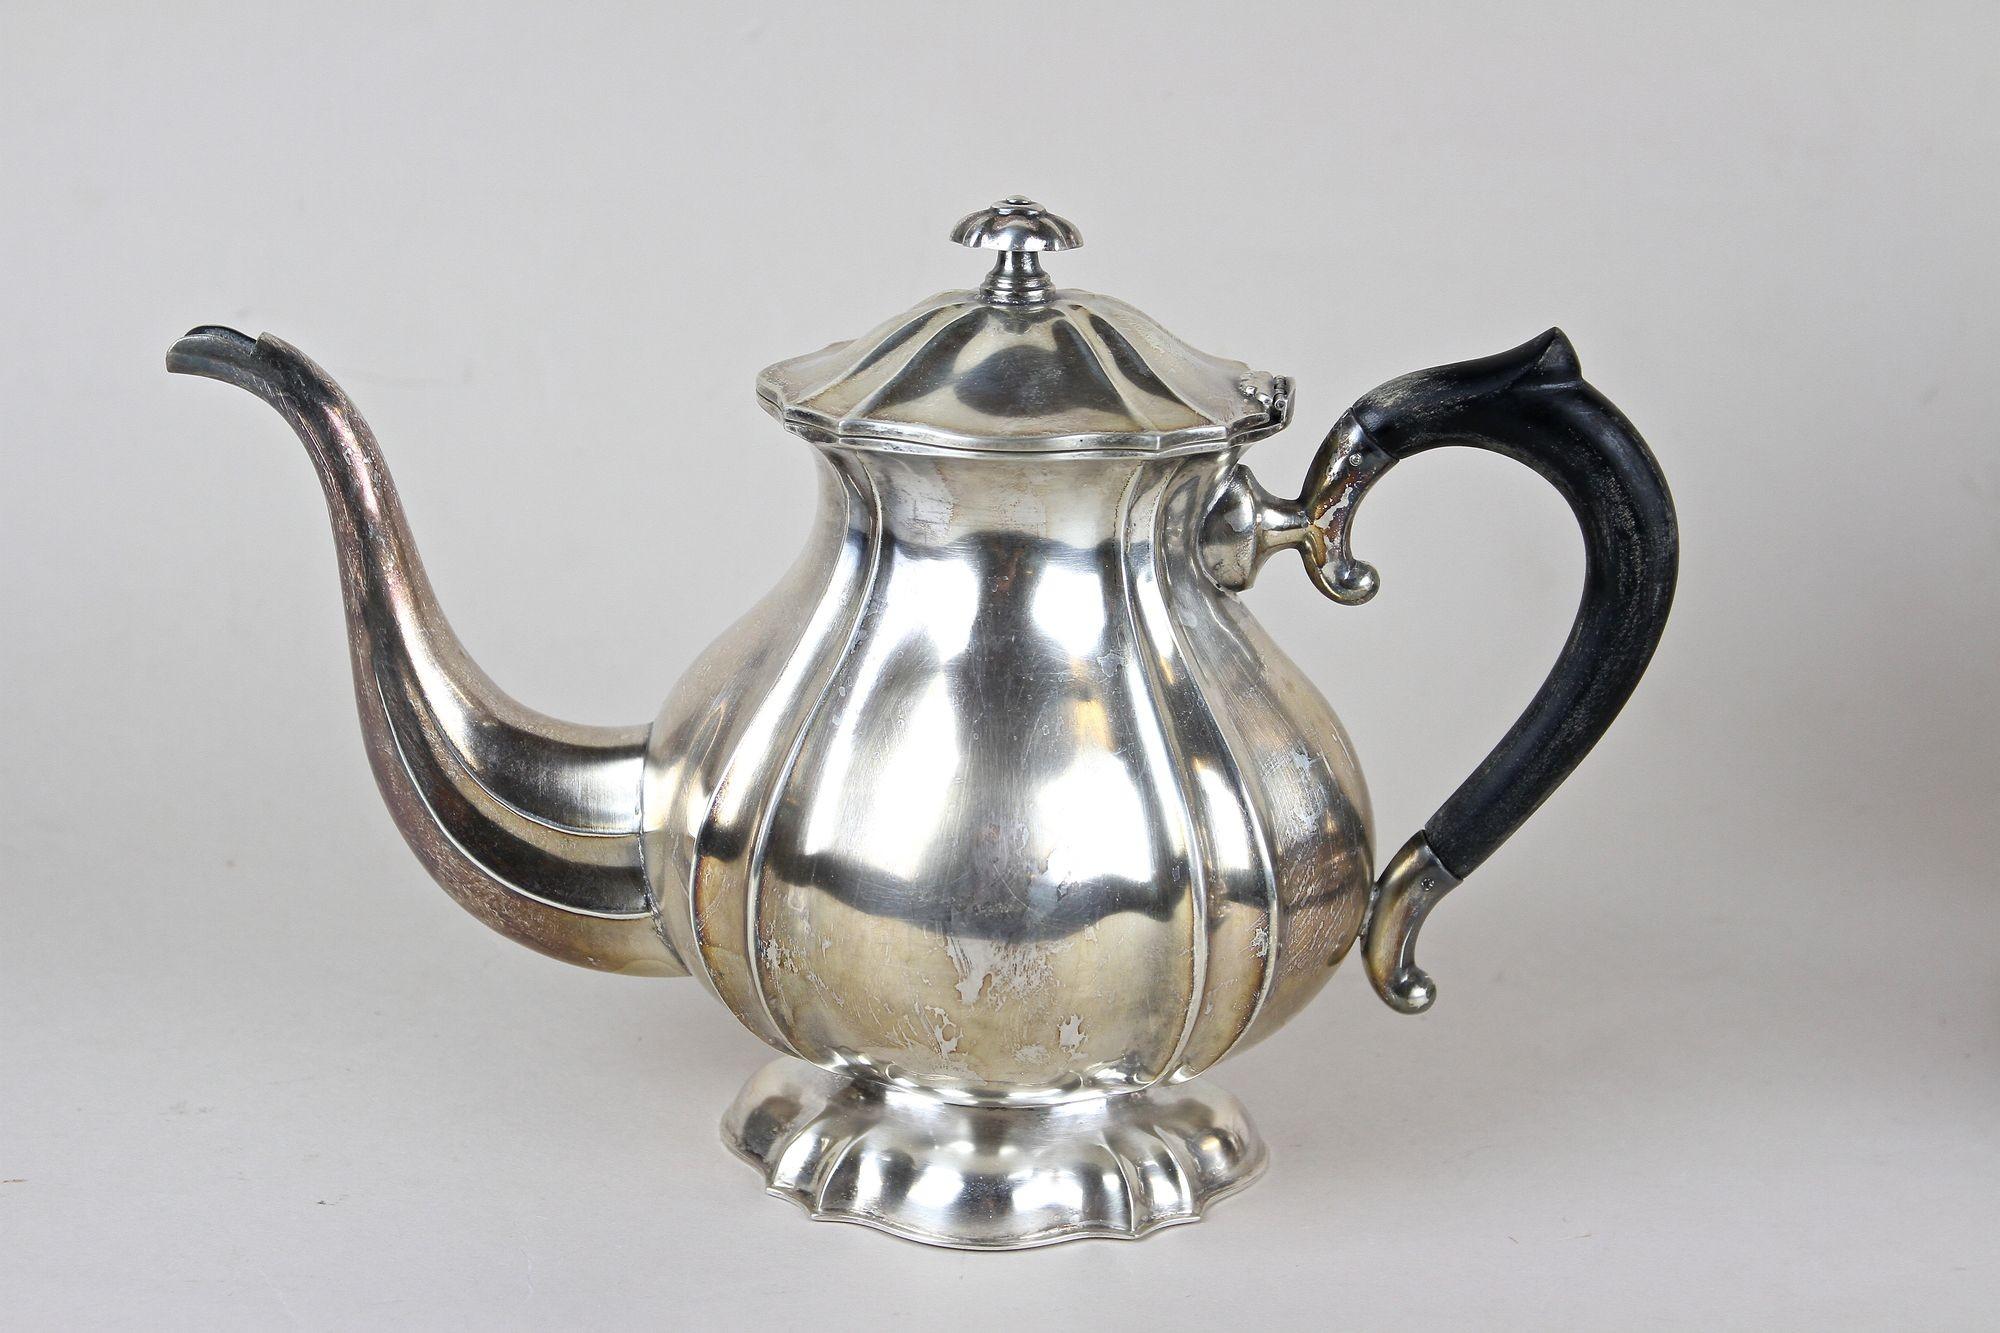 Absolutely gorgeous solid silver Art Nouveau coffee/ tea set of four from the period around 1900 in Austria. This fantastic tea set consists of four matching pieces: a small milk jug, a sugar bowl, a teapot and a coffee pot. All pieces show an